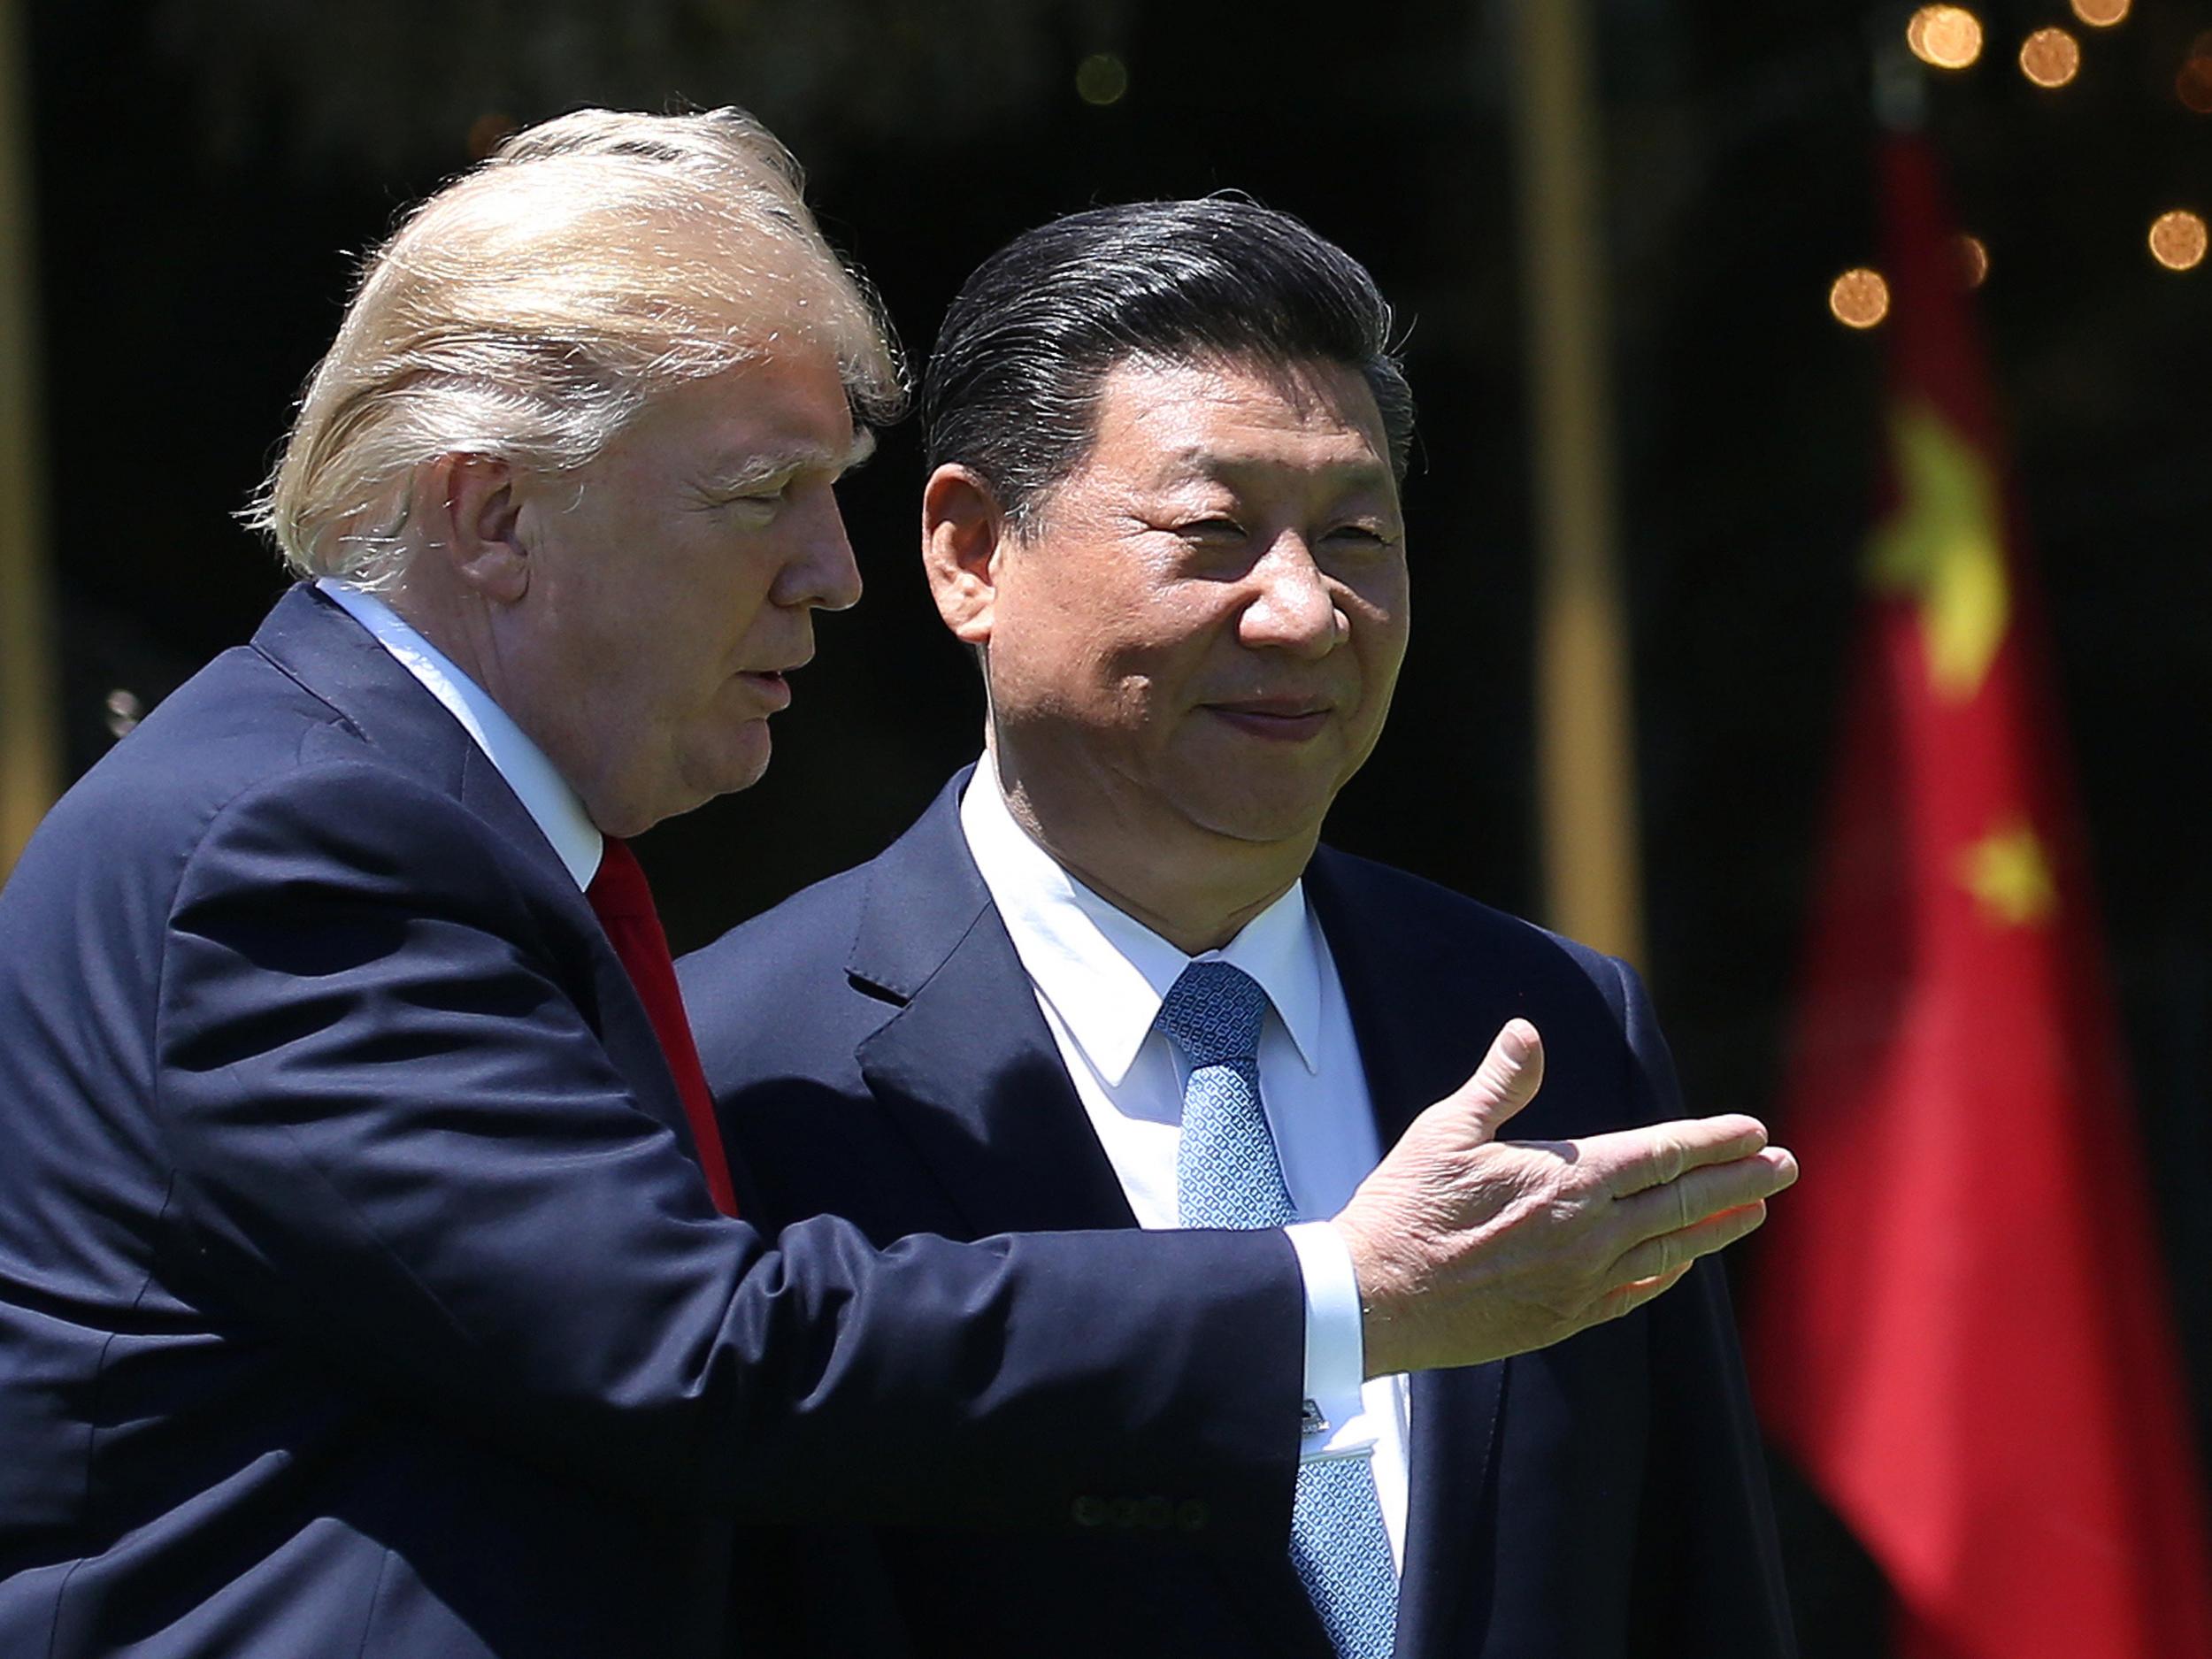 Trump has told US trade officials to look into whether to launch a formal investigation into whether Beijing improperly requires foreign companies to hand over technology in exchange for market access